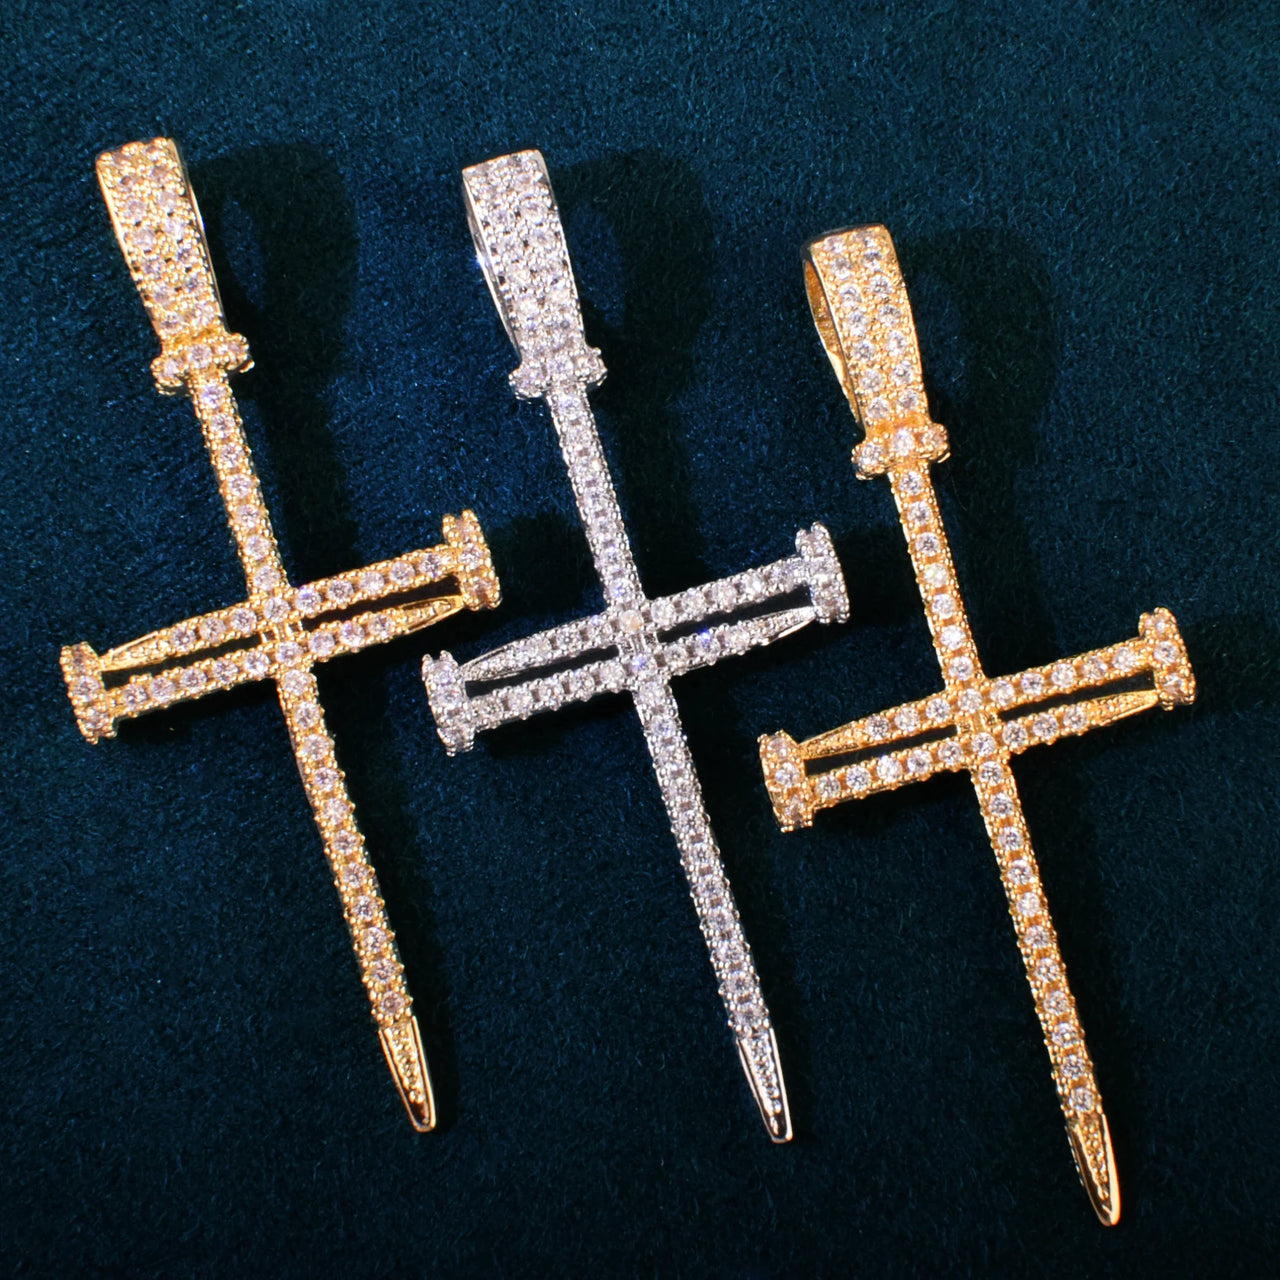 Small Nail Cross Pendant - Different Drips